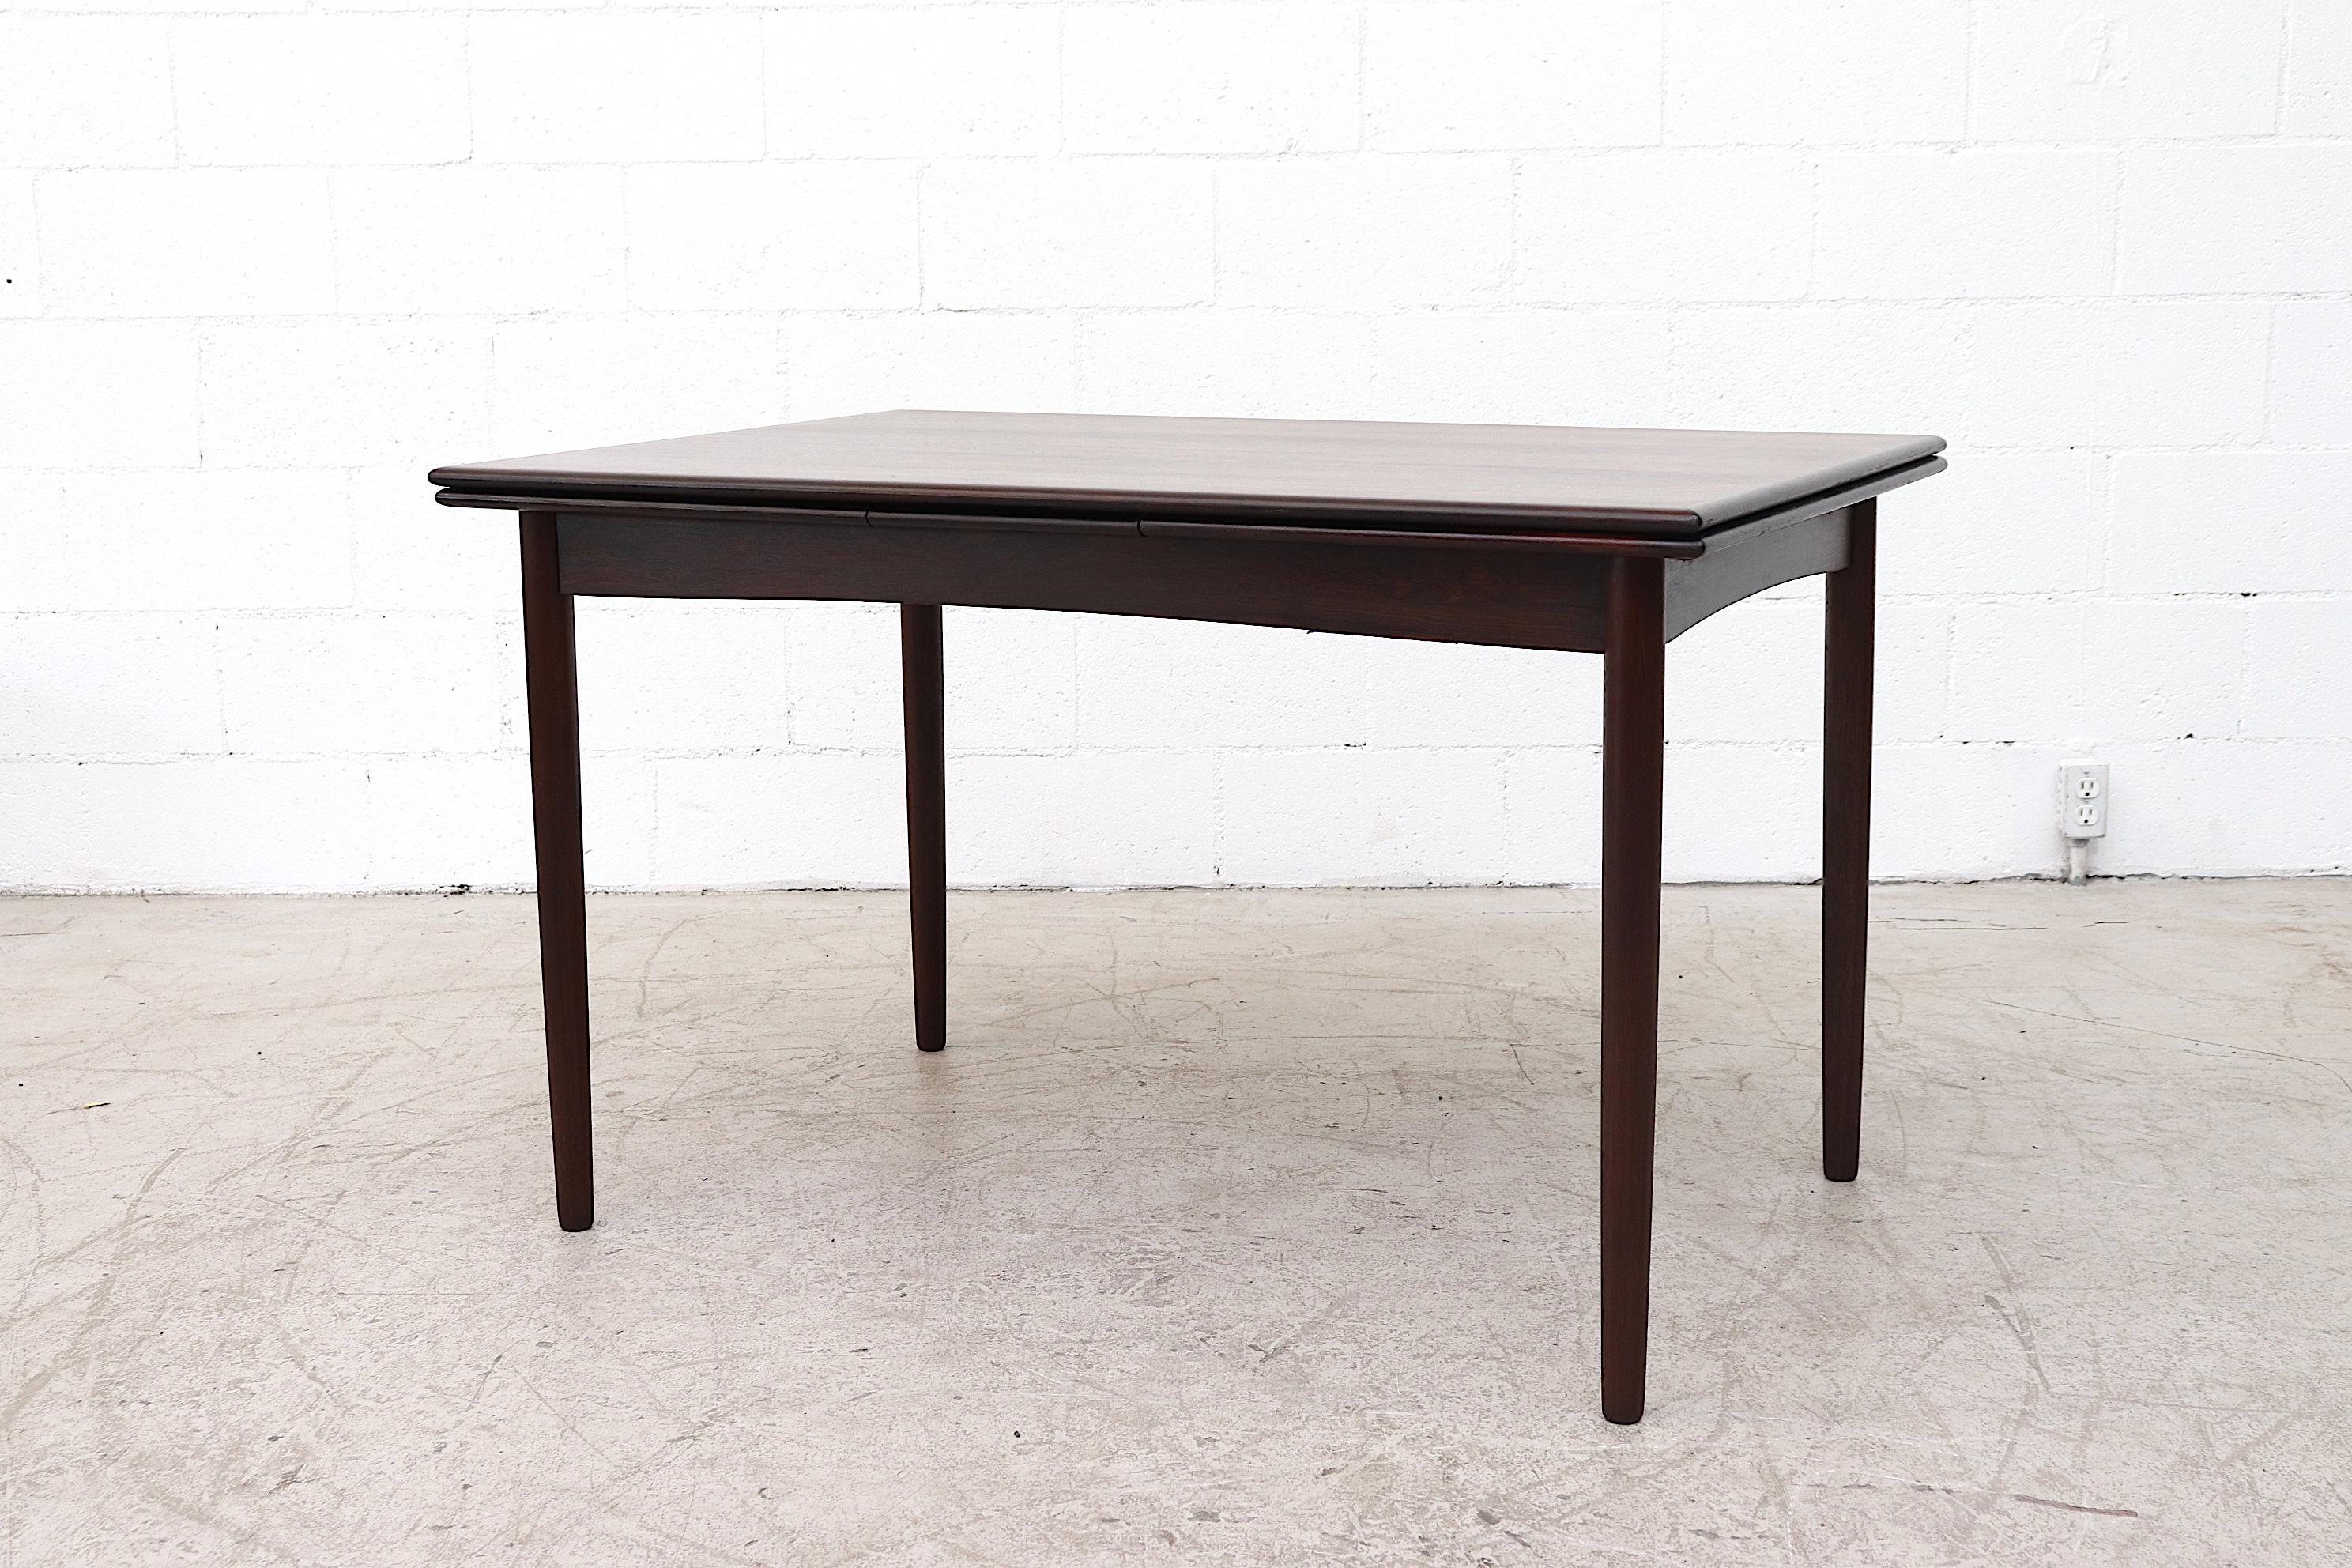 Beautiful rosewood dining table with round tapered legs and slide-out leaf extension. Beautiful grain, lightly refinished and slide to extend leaves. In good original condition with wear consistent with age and use. Two available, tones may vary